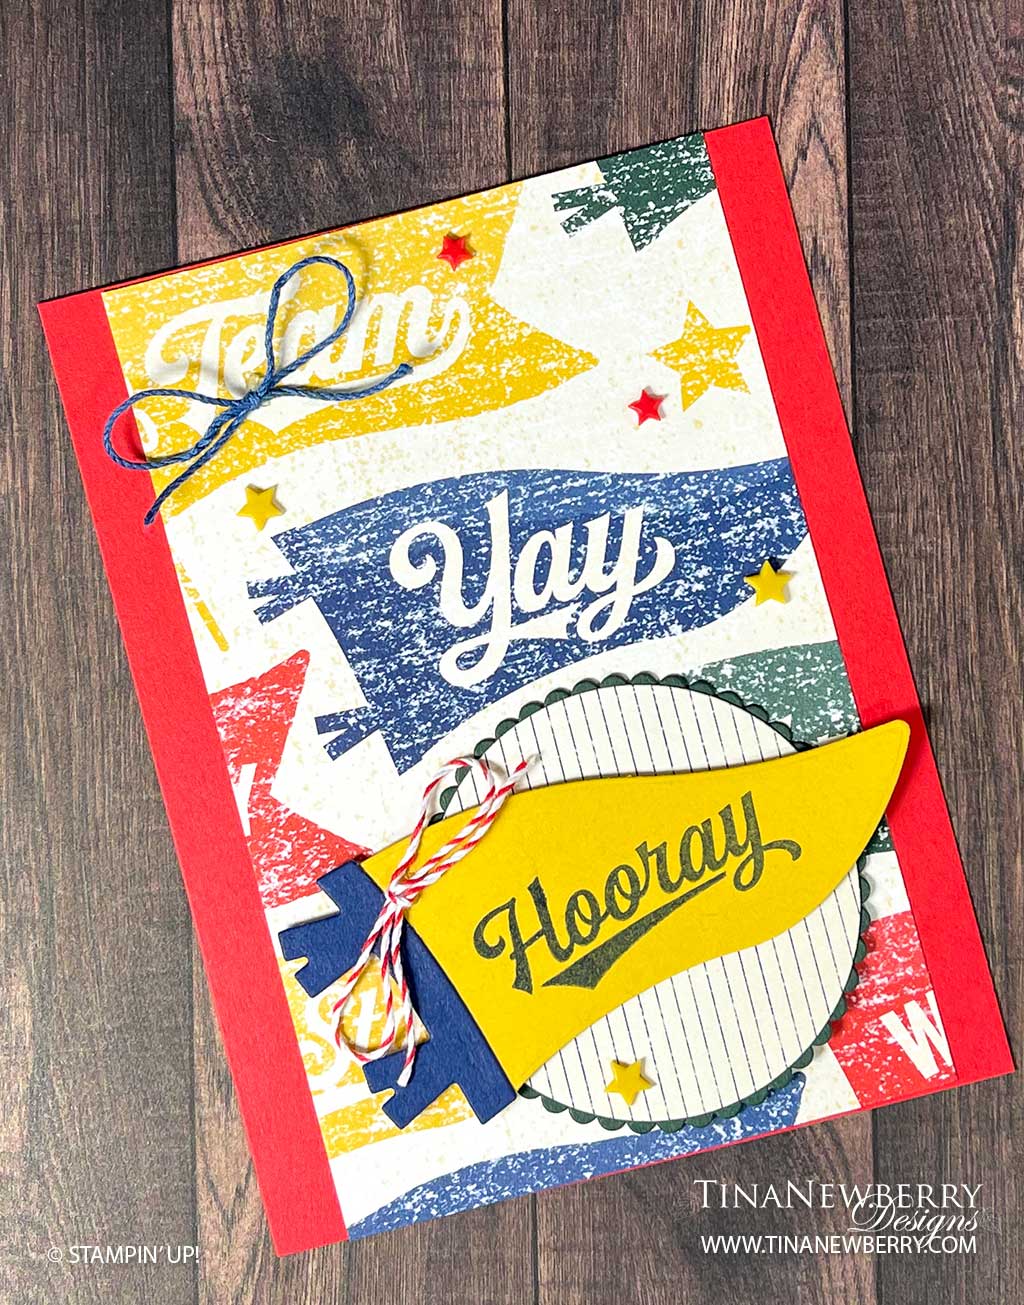 Hey Baseball Fans, Greeting Cards for You